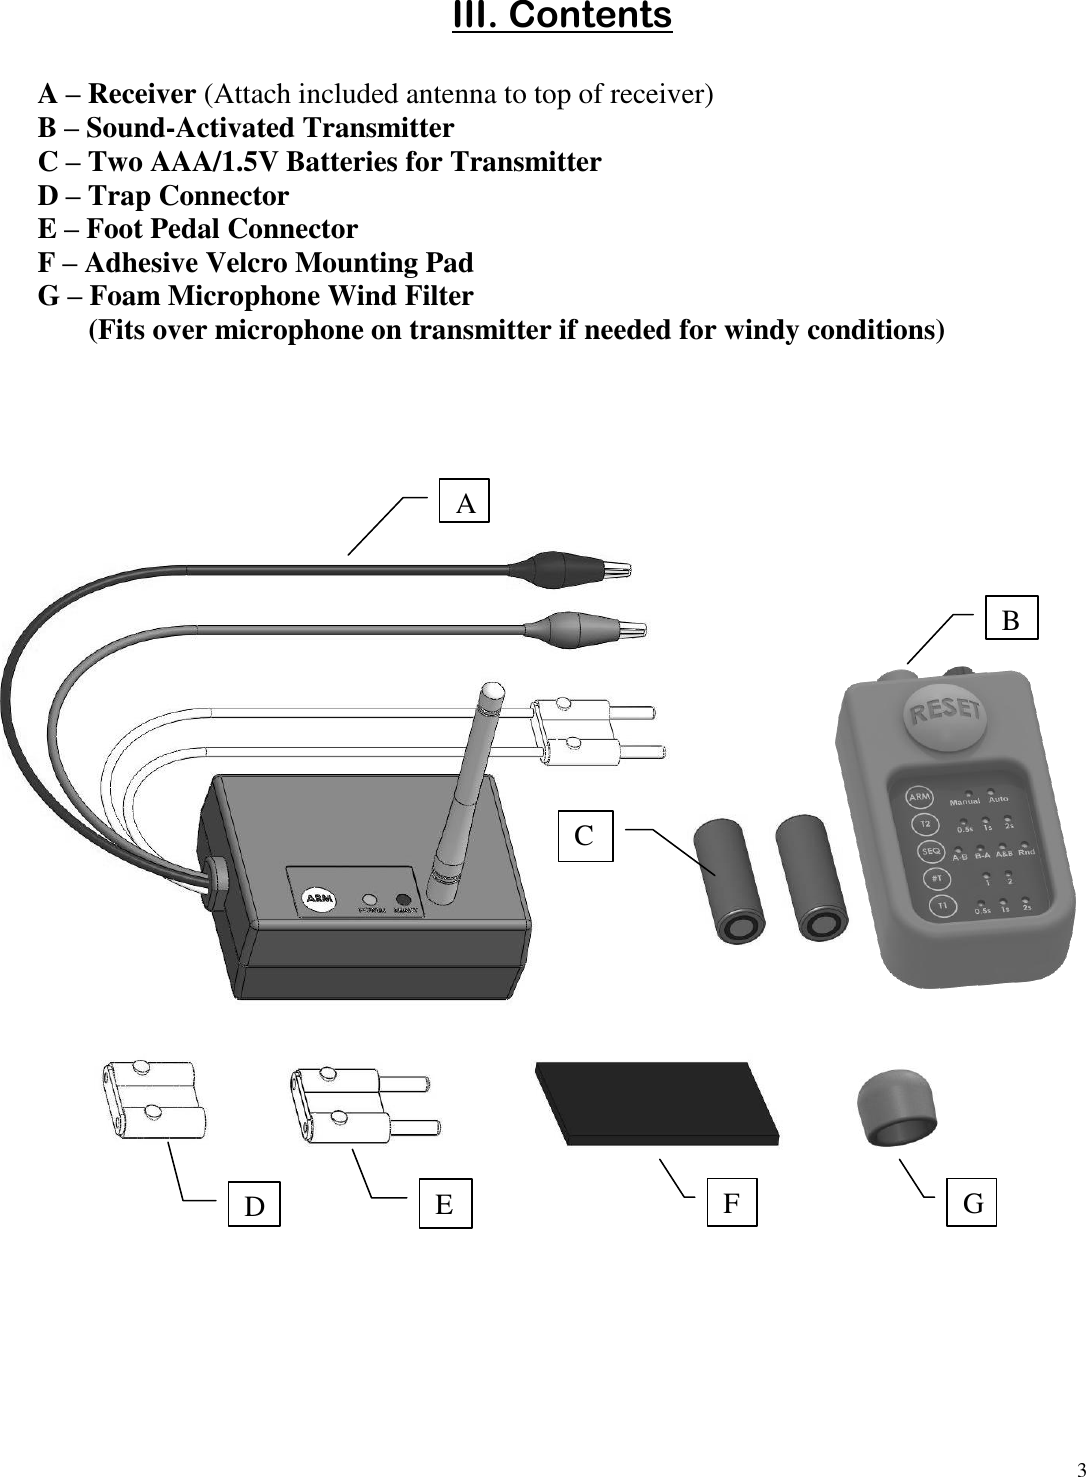 3  III. Contents  A – Receiver (Attach included antenna to top of receiver) B – Sound-Activated Transmitter C – Two AAA/1.5V Batteries for Transmitter D – Trap Connector  E – Foot Pedal Connector F – Adhesive Velcro Mounting Pad G – Foam Microphone Wind Filter        (Fits over microphone on transmitter if needed for windy conditions)    A B D C E F G 